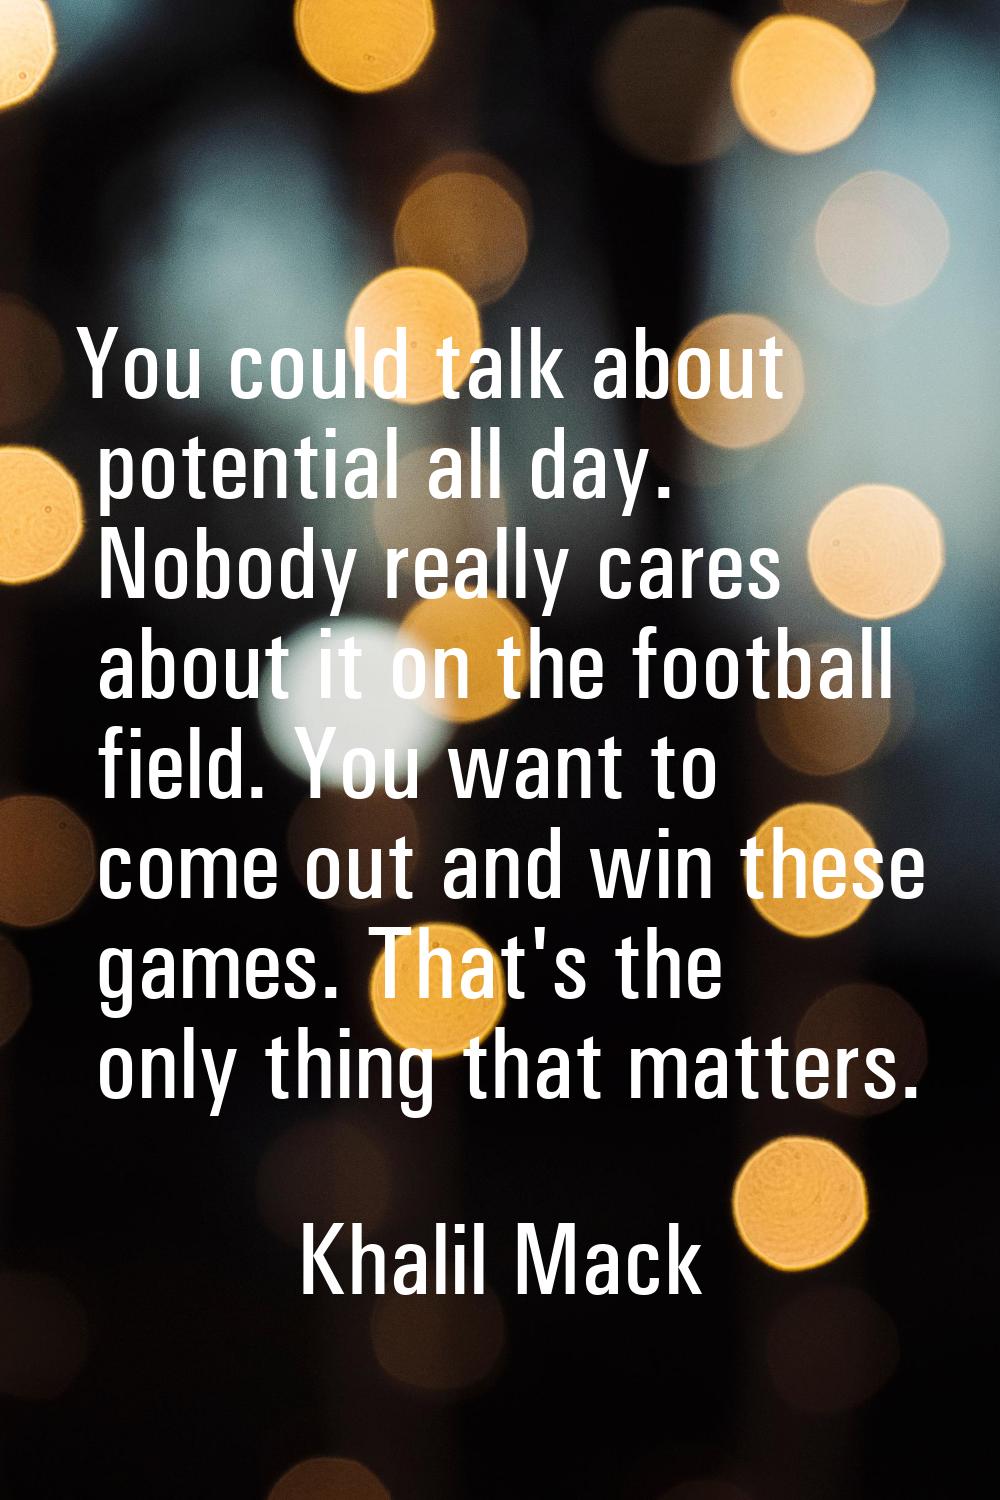 You could talk about potential all day. Nobody really cares about it on the football field. You wan